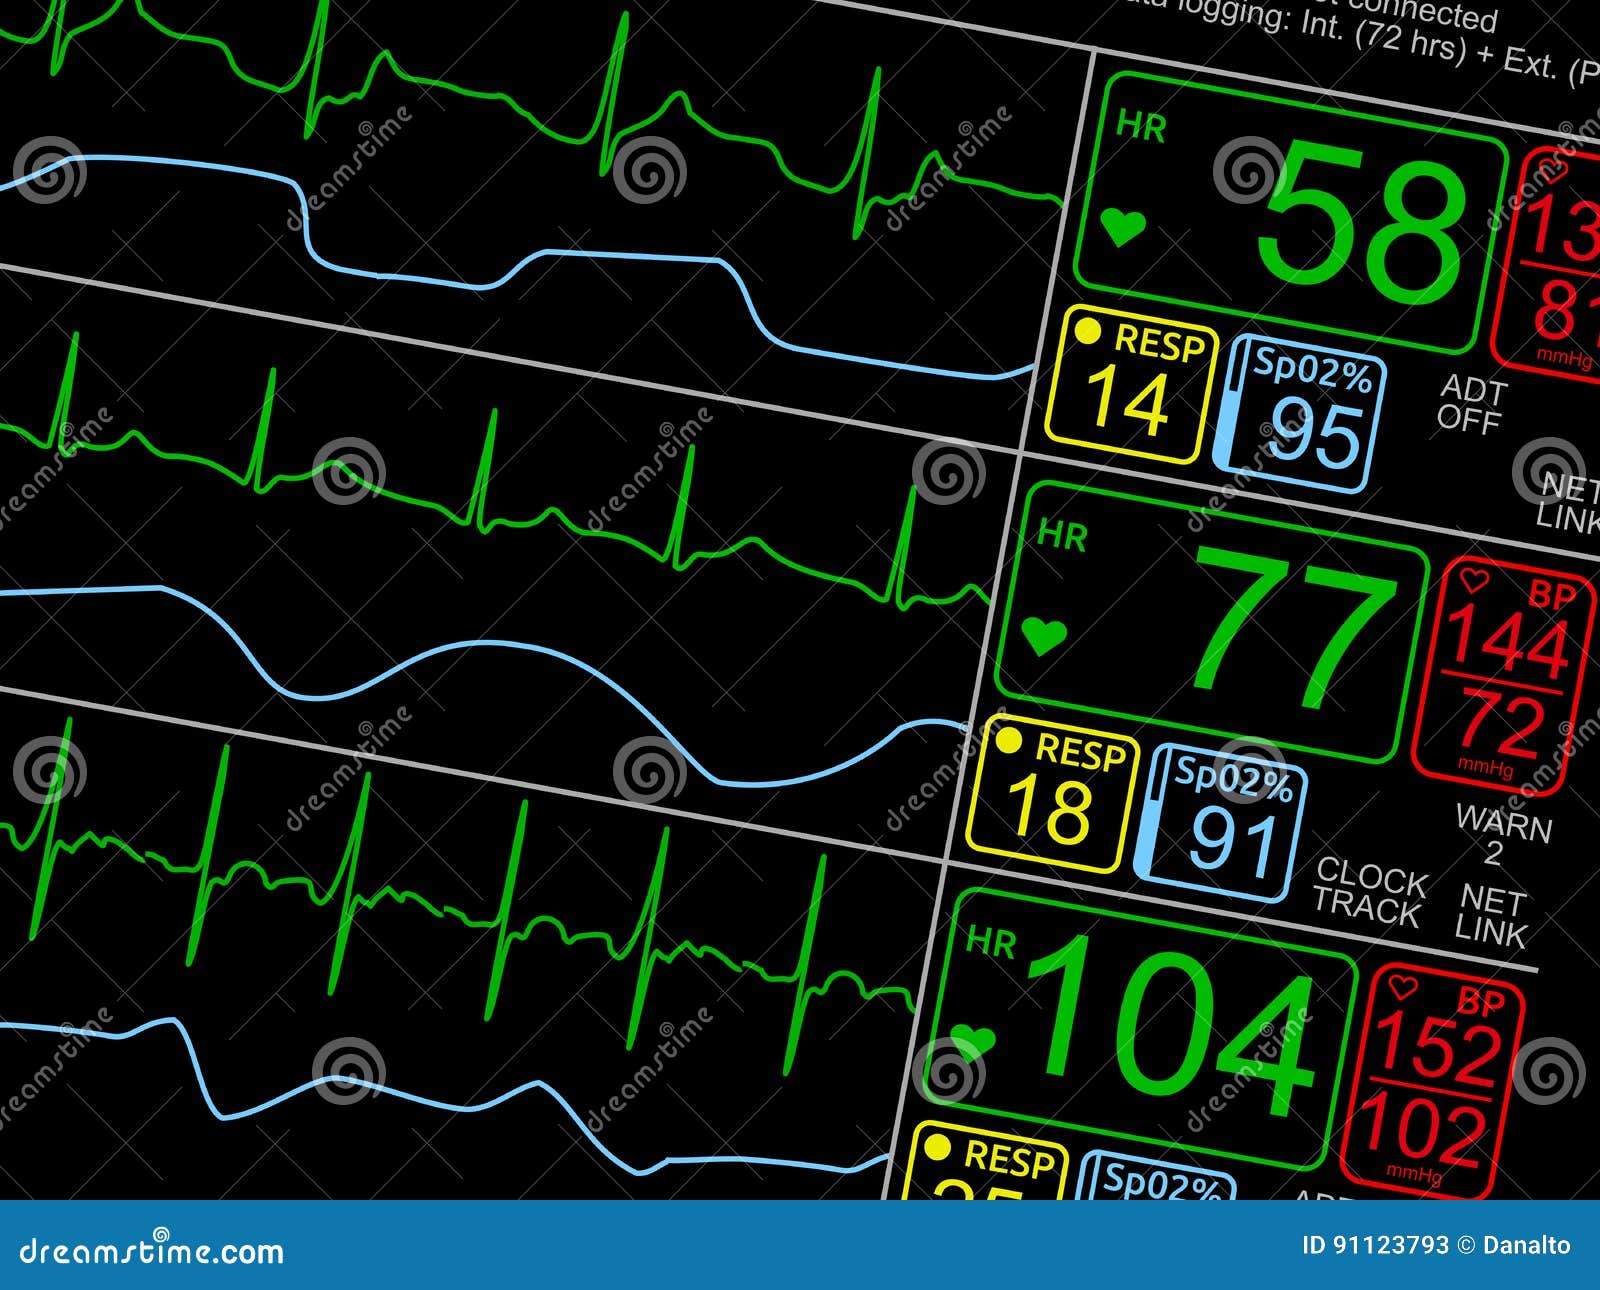 patient`s vital signs on icu monitor